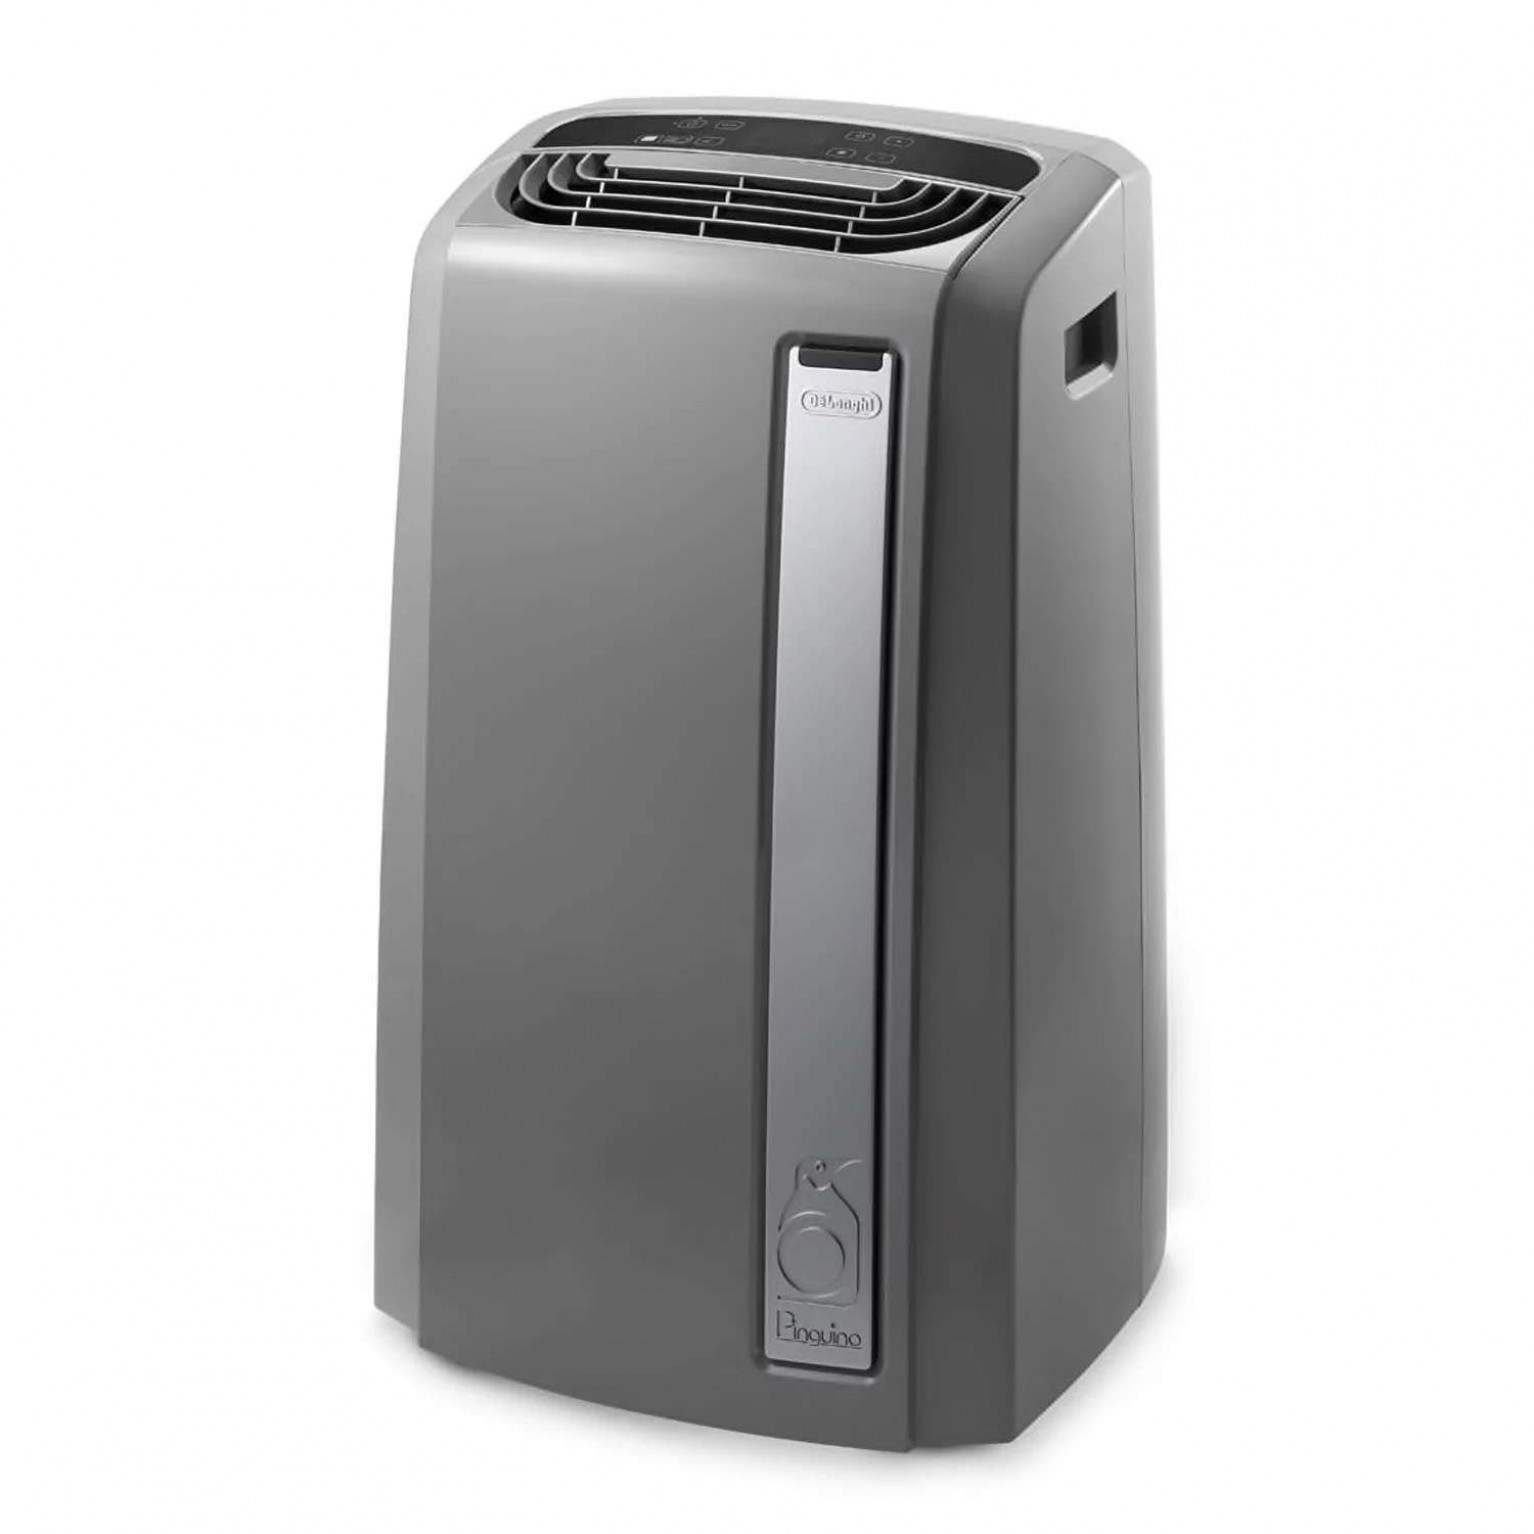 Which Portable Ac Works The Best